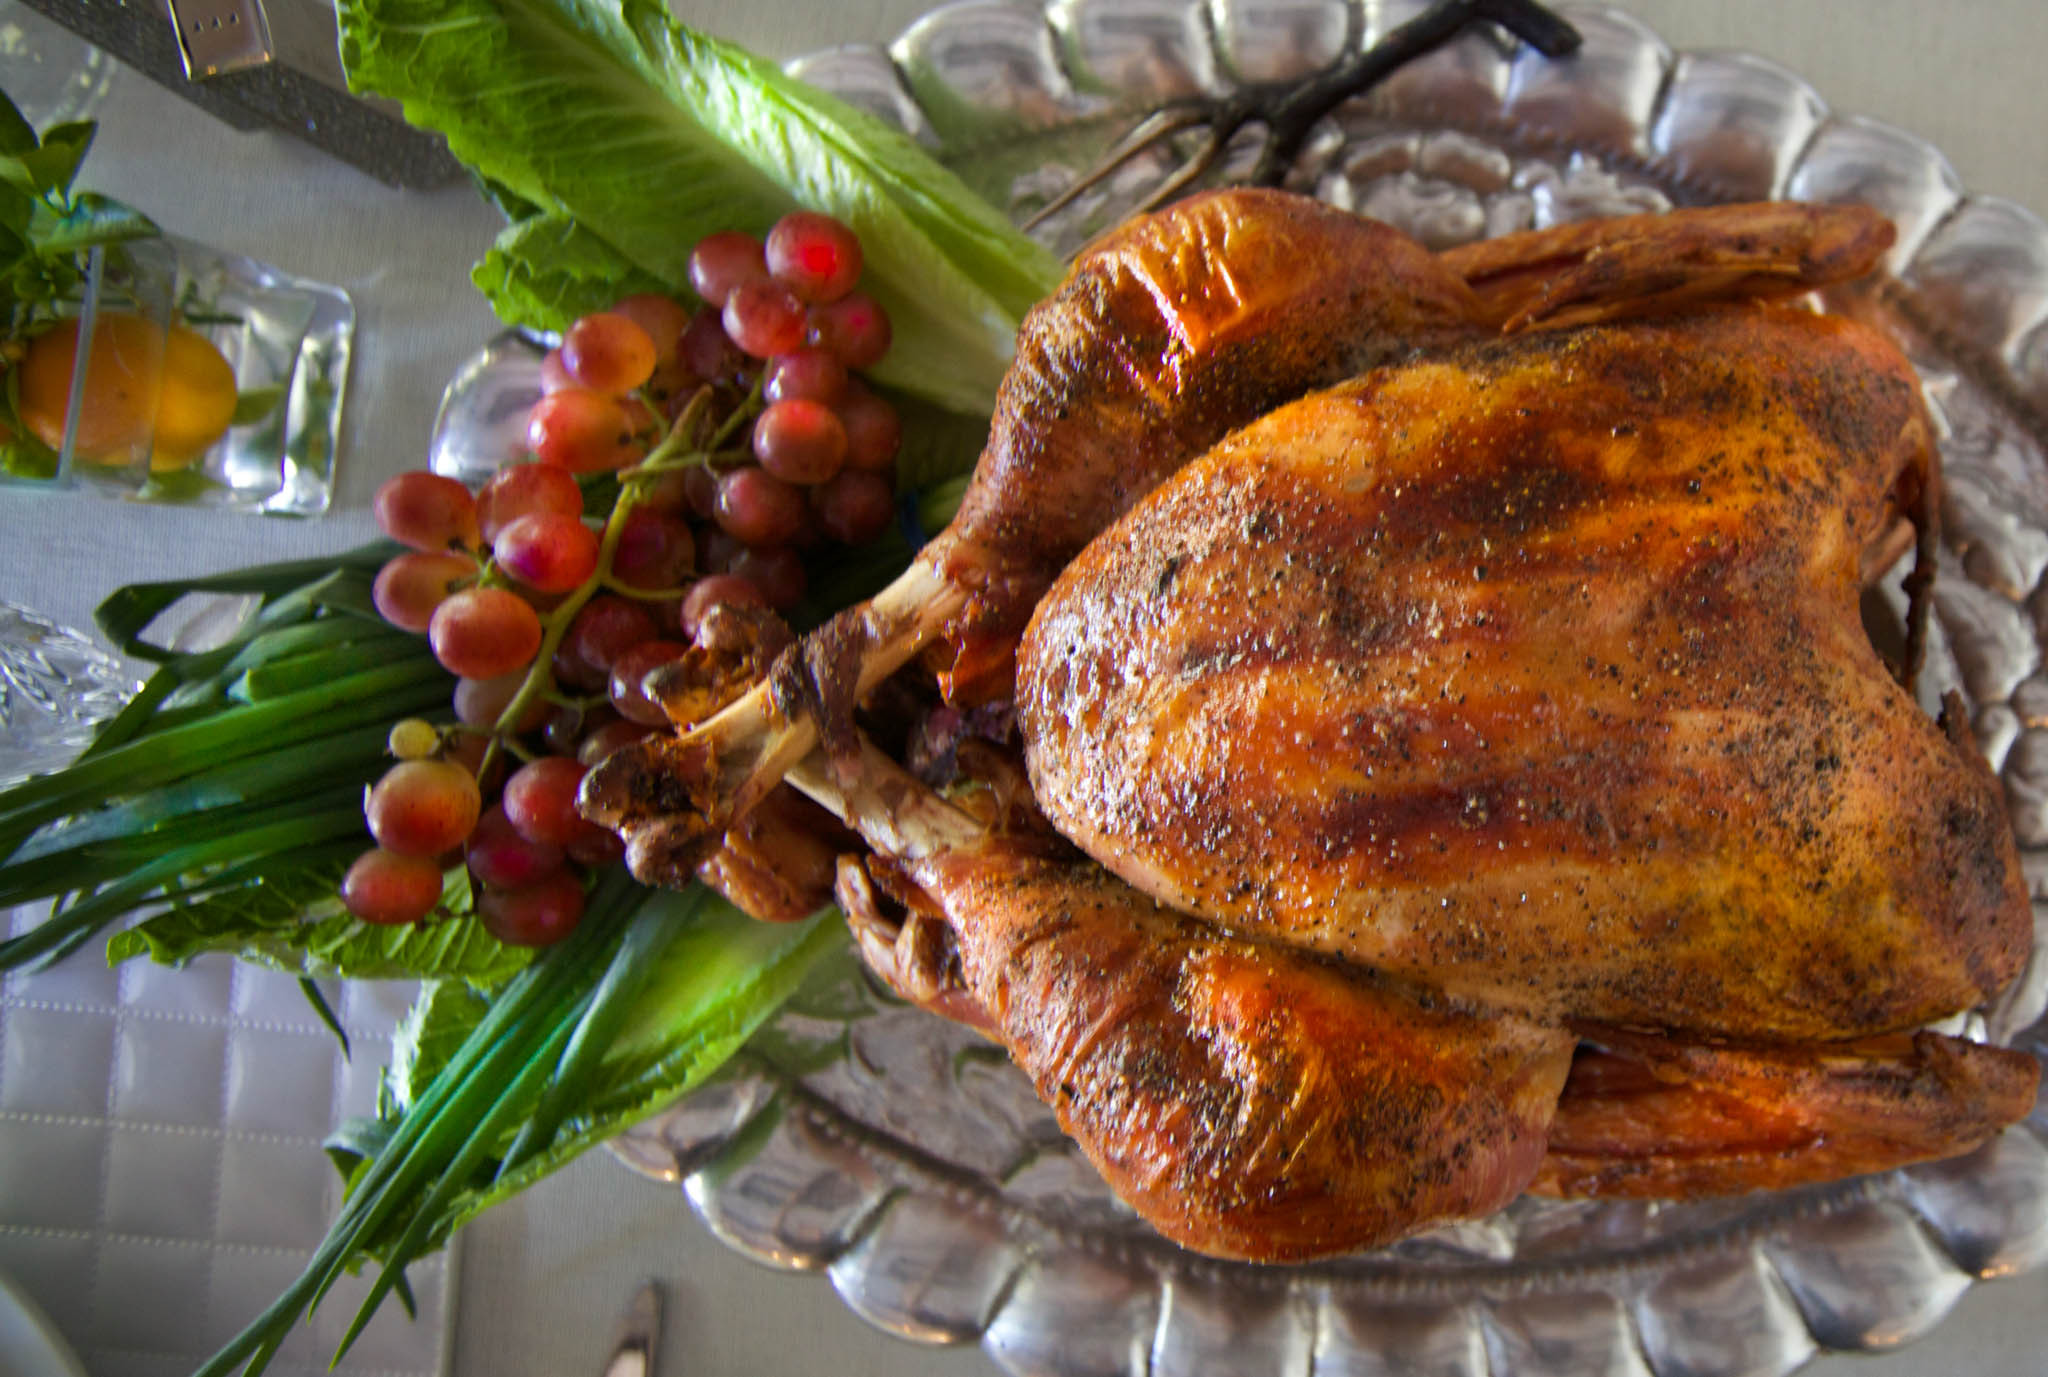 Buy A Cooked Turkey For Thanksgiving
 Cane Brined Roast Turkey is the key to moist Thanksgiving